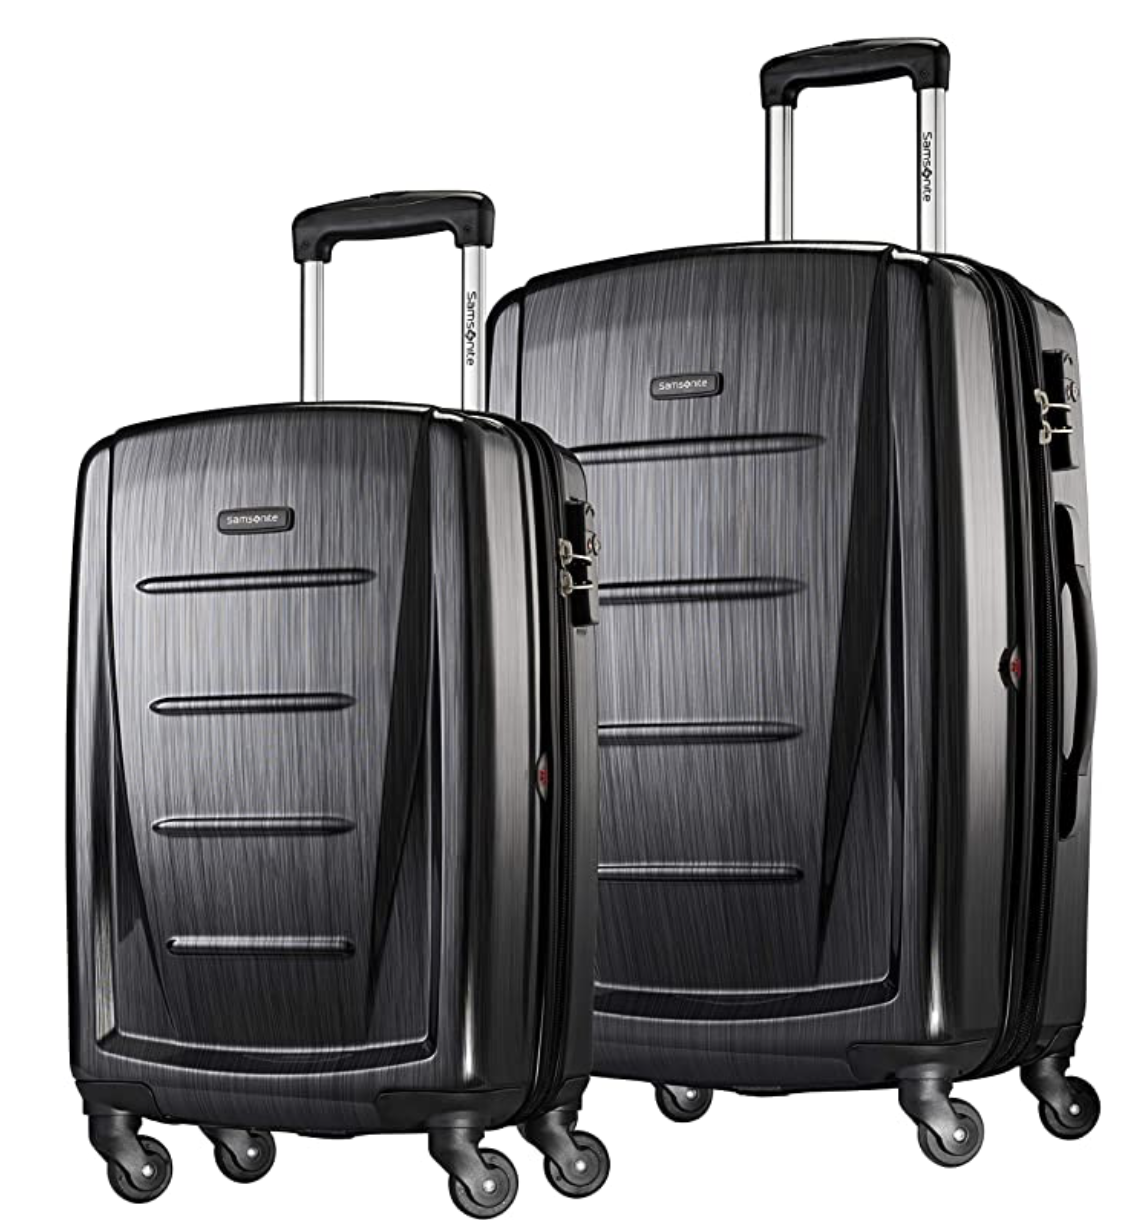 belediging Horizontaal bijnaam Amazon Sale: Up to 50% off Luggage from Samsonite and American Tourister -  Running with Miles